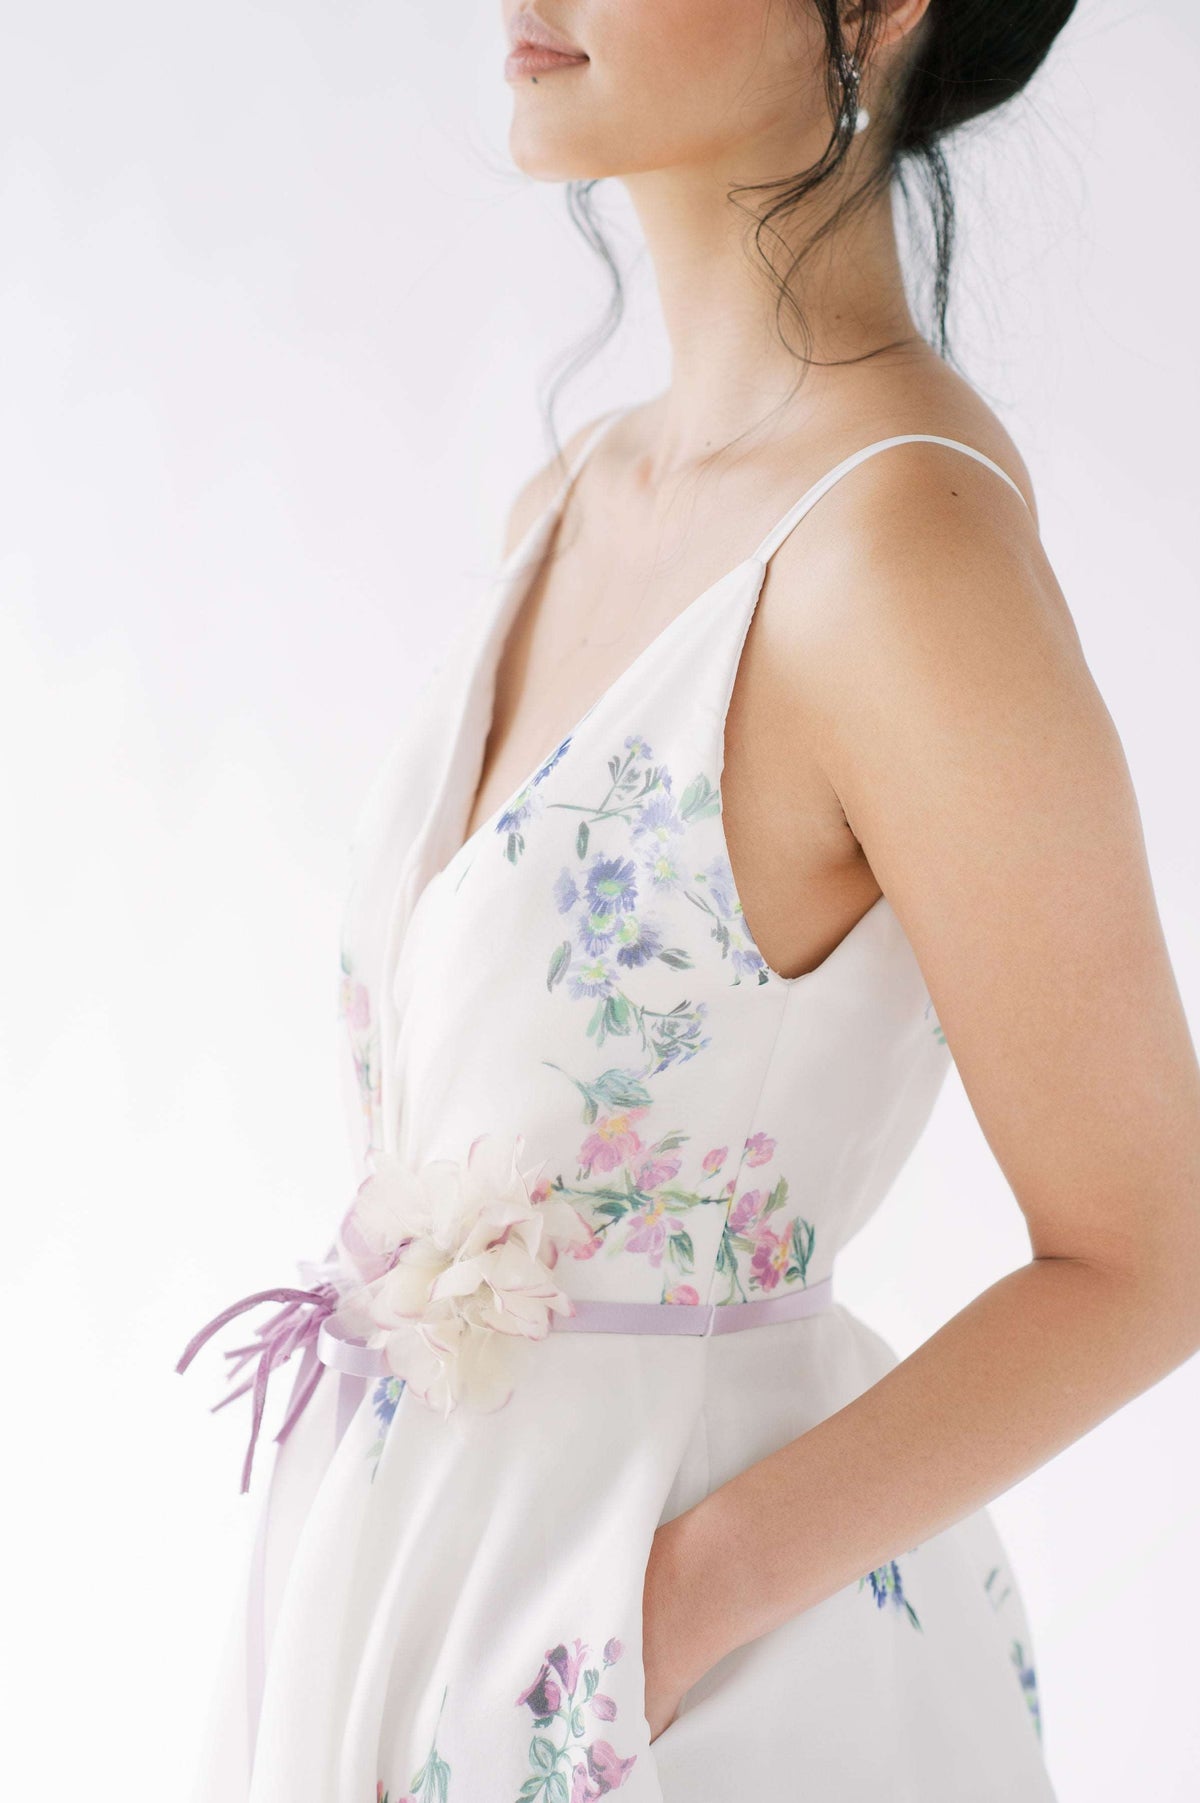 Romantic floral wedding dress. Ballgown with side slit and pockets. Lavender, pale green and white printed silk organza. .Handmade by Catherine Langlois, Toronto, Canada